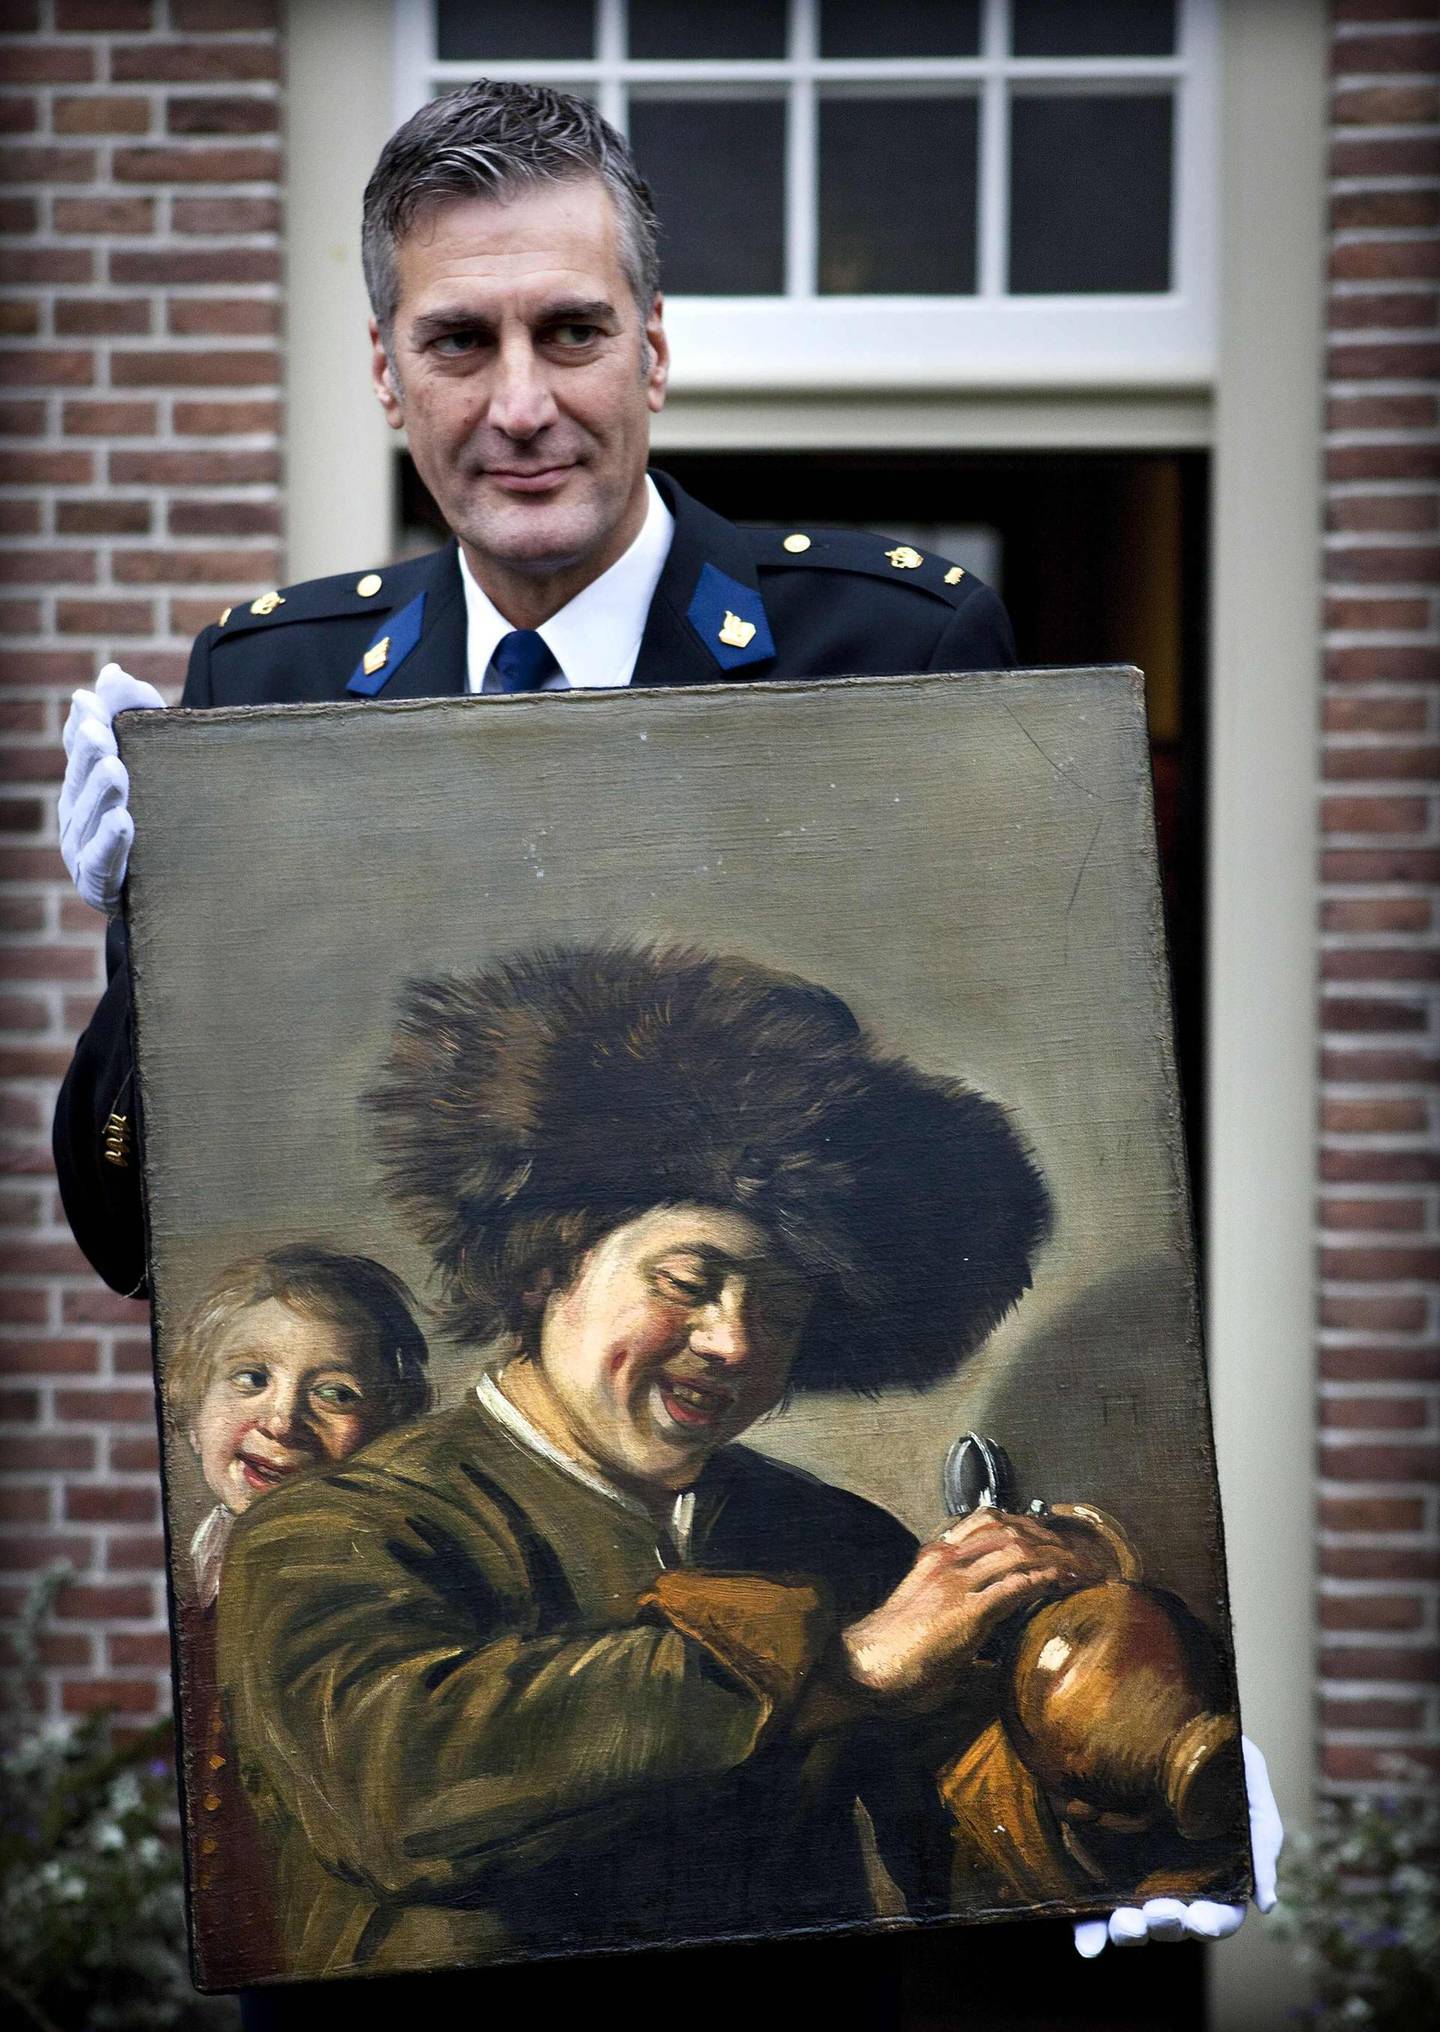 This photograph taken on November 3, 2011, shows District Chief of Alblasserwaard, Bart Willemsen showing the recovered painting "Two Laughing Boys" by Frans Hals which was stolen from the Leerdam Museum in May 2011.  Thieves have stolen the painting "Two Laughing Boys" by Dutch golden age artist Frans Hals from a museum in the Netherlands, the third time it has been taken, police said on August 27, 2020. - Netherlands OUT
 / AFP / ANP / ANP / Ilvy Njiokiktjien
